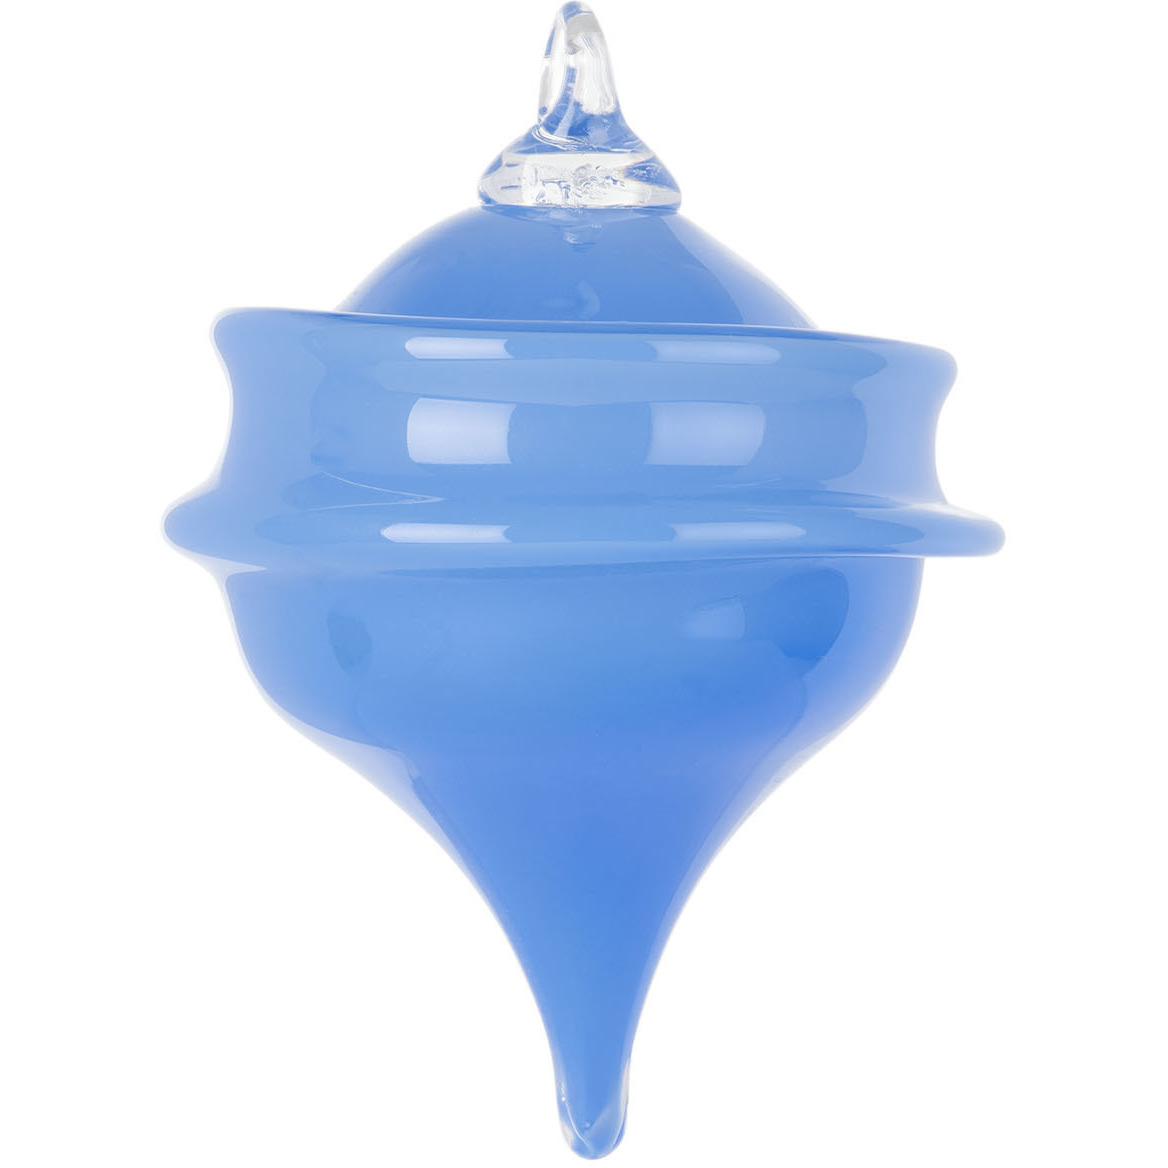 Sticky Glass SSENSE Exclusive Blue Deflated Ornament - image 1